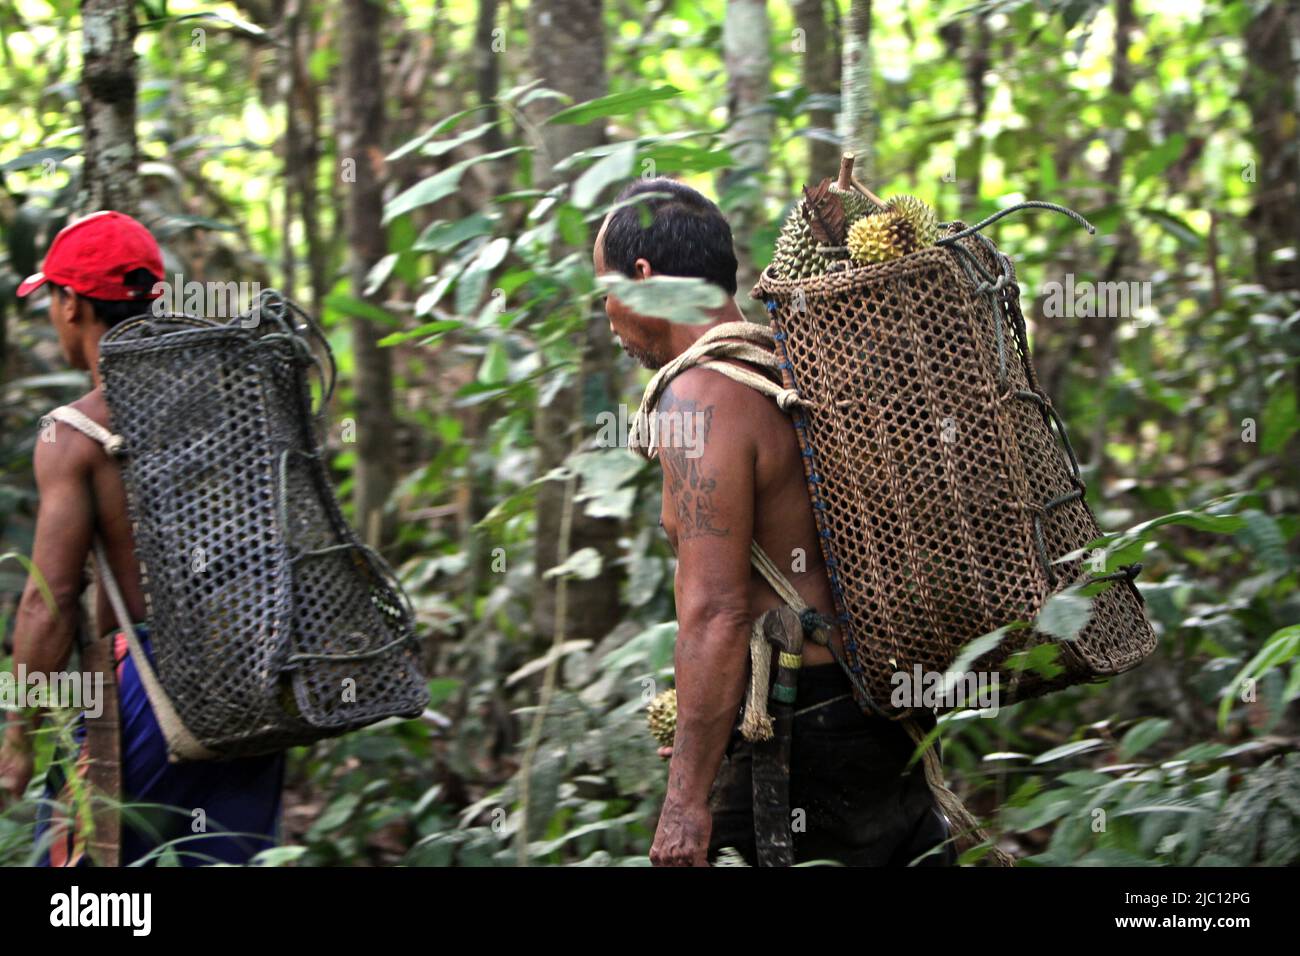 A man carrying a rattan bag loaded with freshly harvested durian fruits as he is walking with a relative in the forest in Sungai Utik, Batu Lintang, Embaloh Hulu, Kapuas Hulu, West Kalimantan, Indonesia. Stock Photo